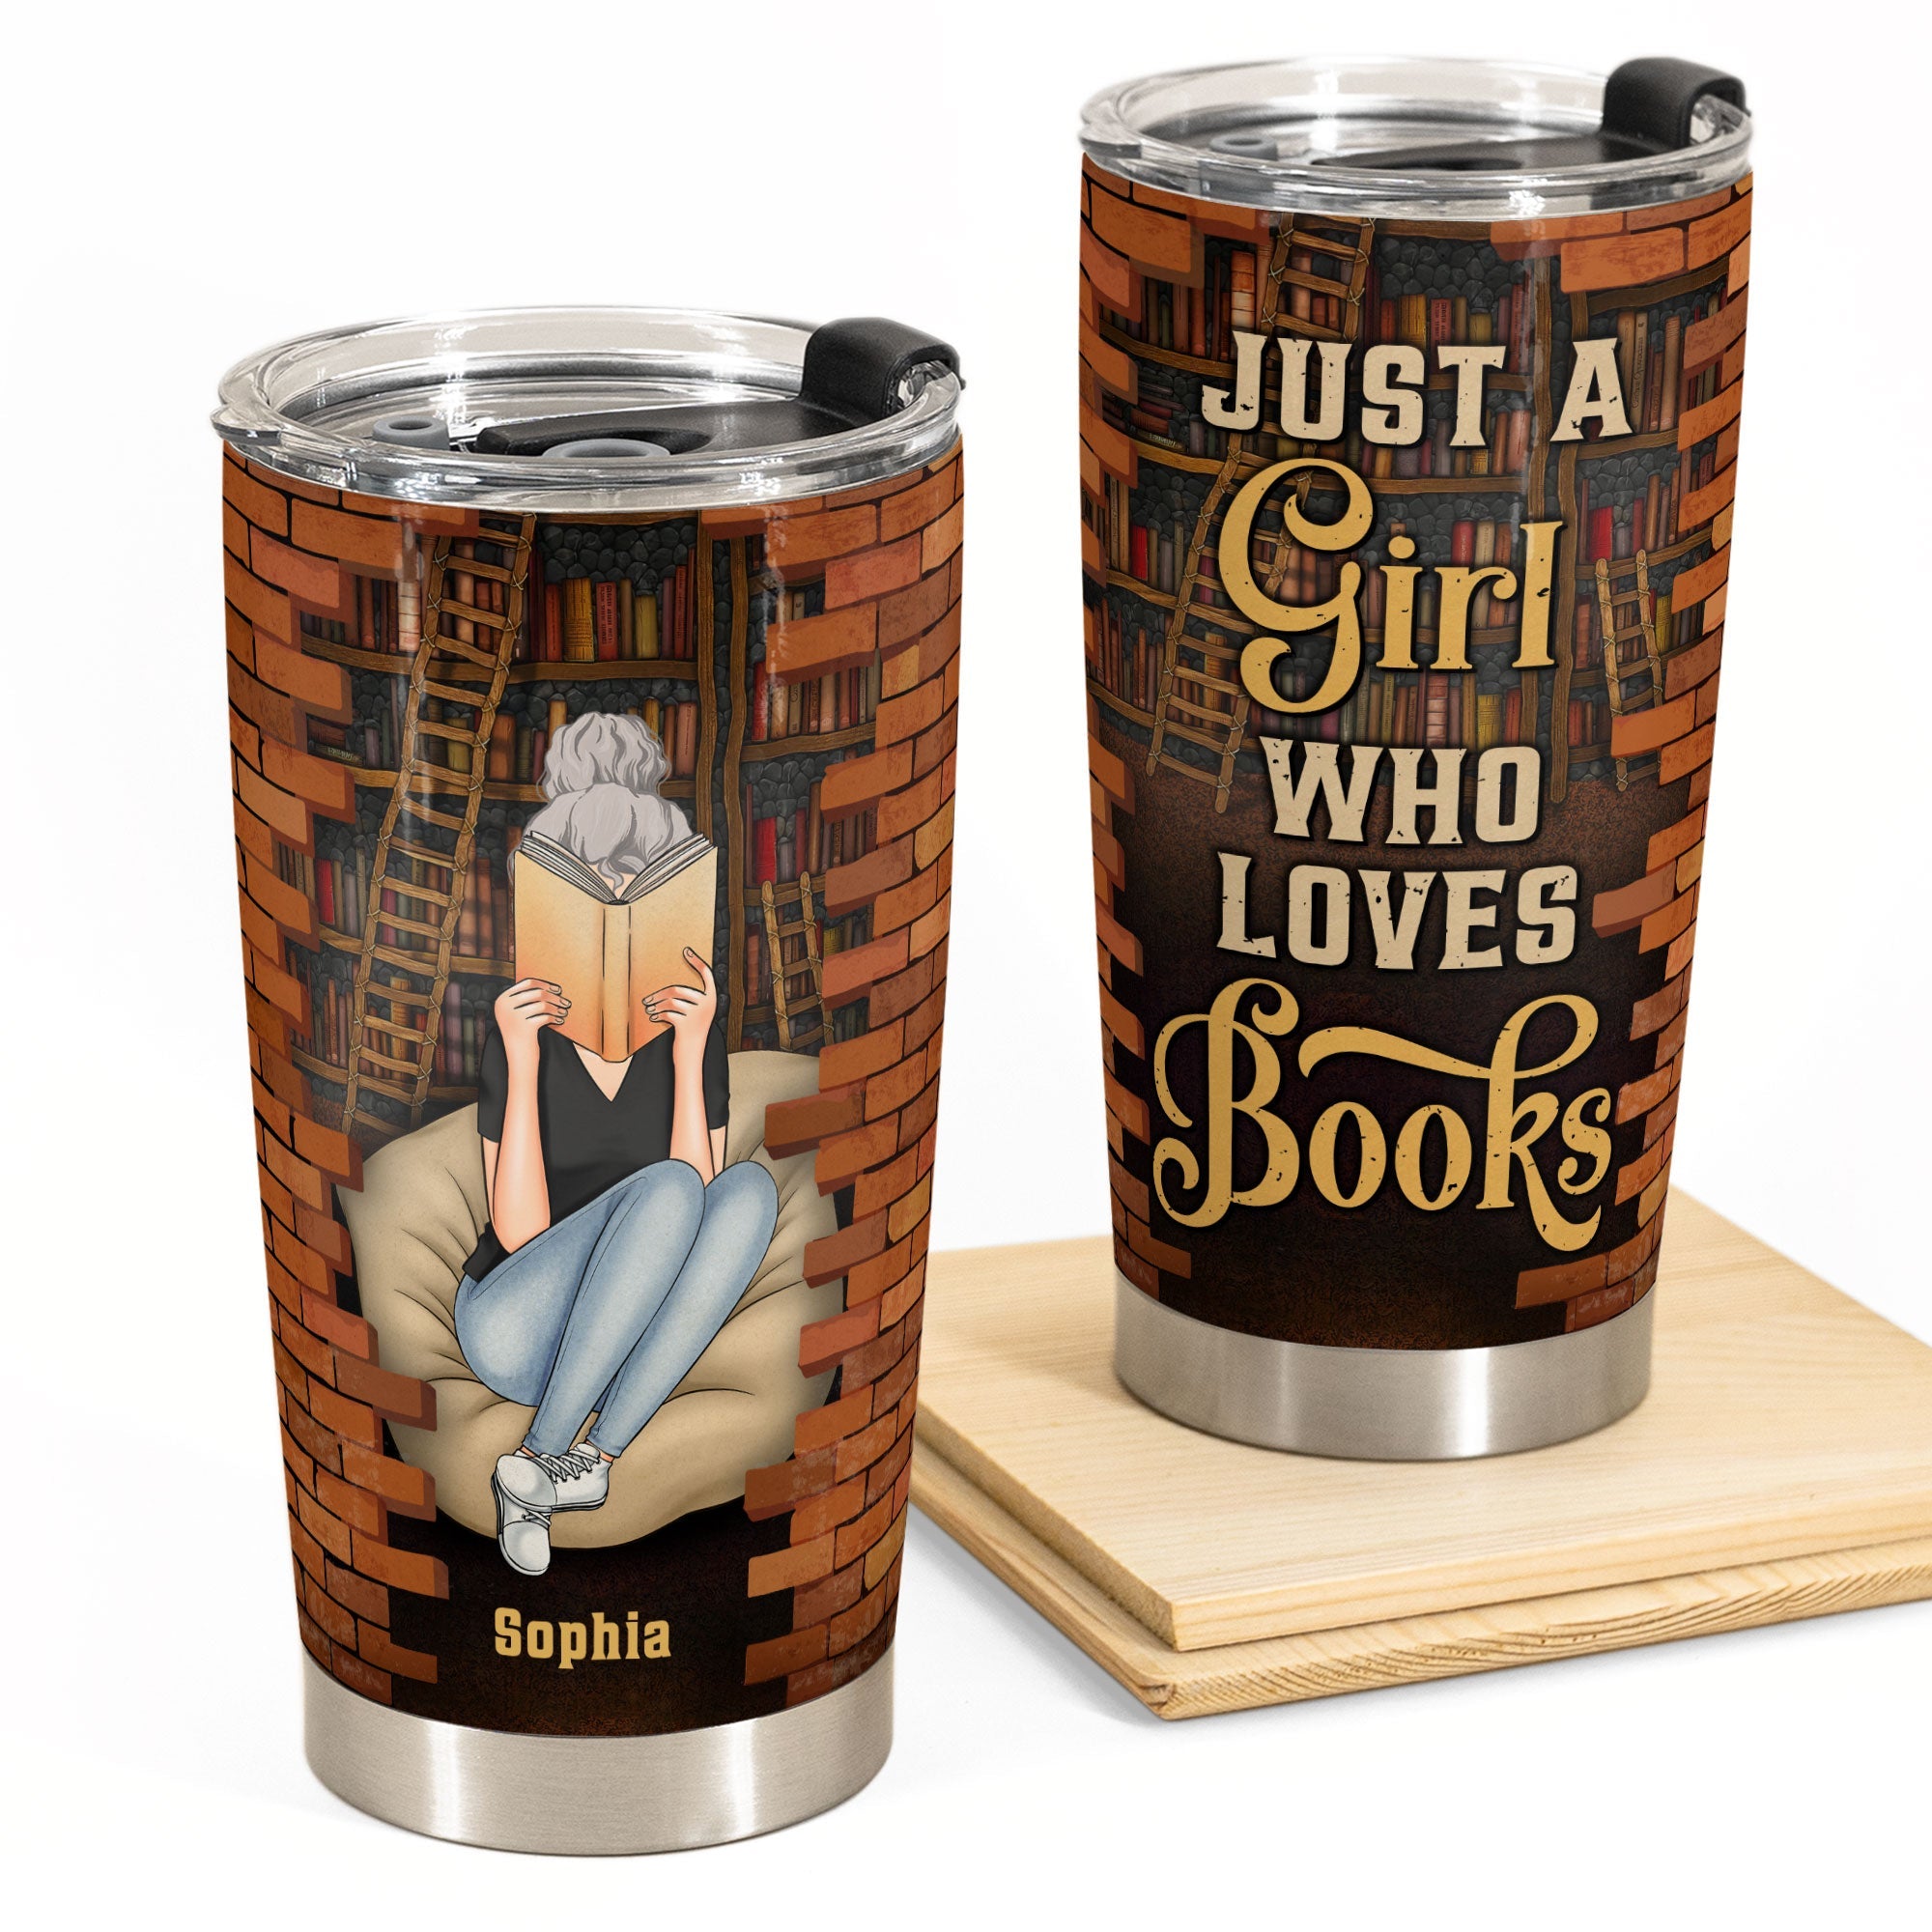 Just A Girl Who Loves Books - Vintage Version - Personalized Tumbler Cup - Birthday Gift For Book Lovers, Bookworms